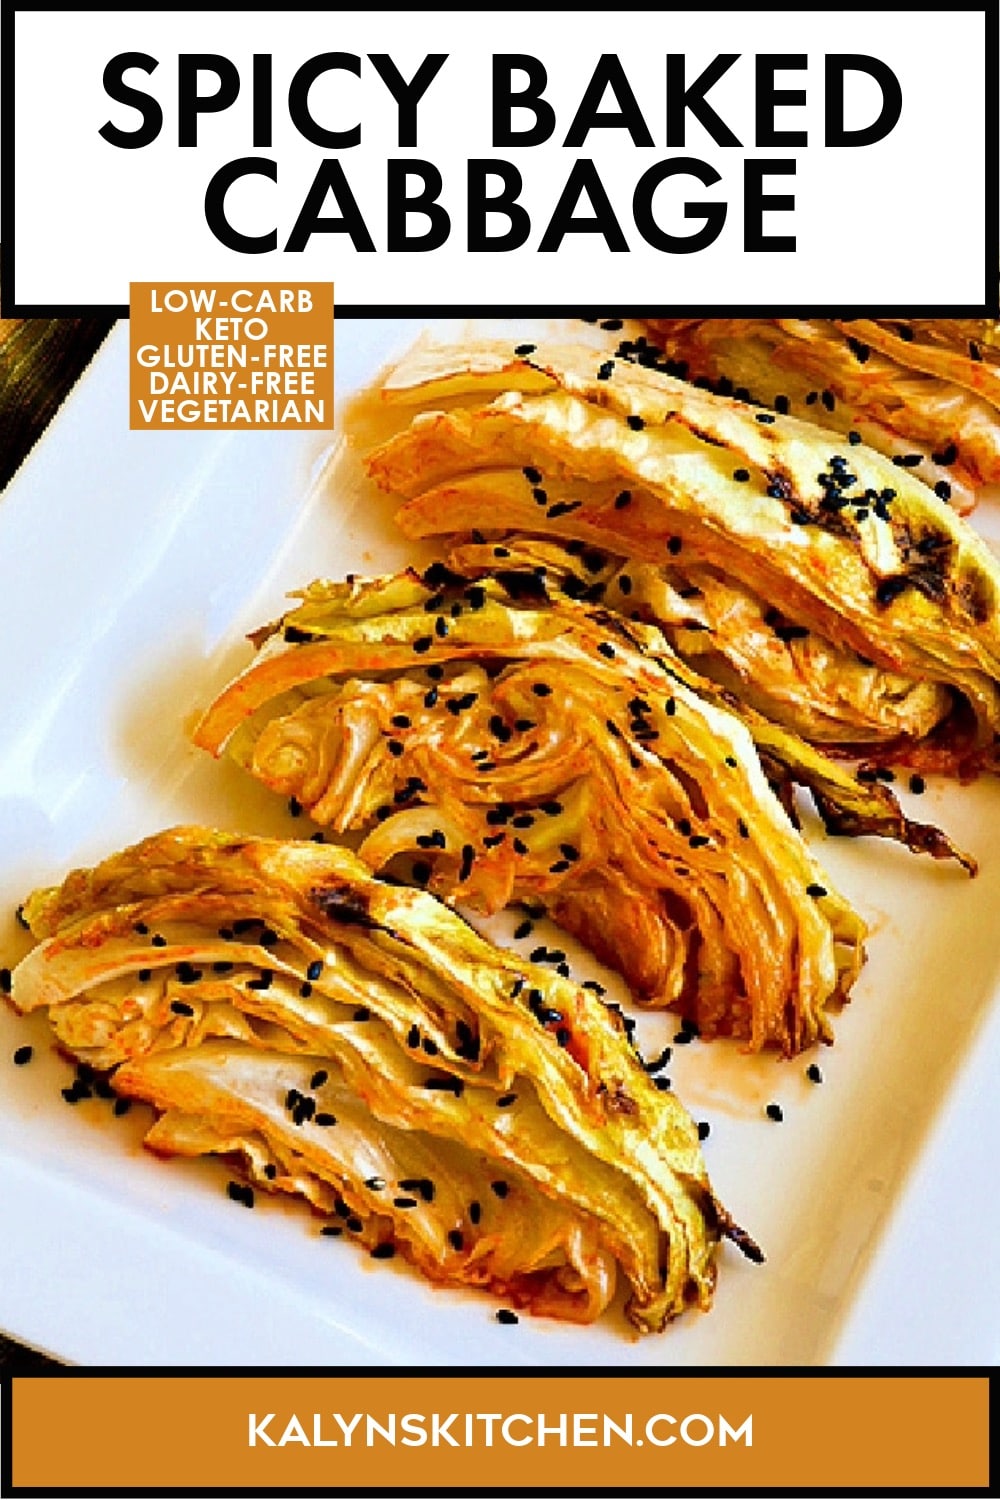 Pinterest image of Spicy Baked Cabbage